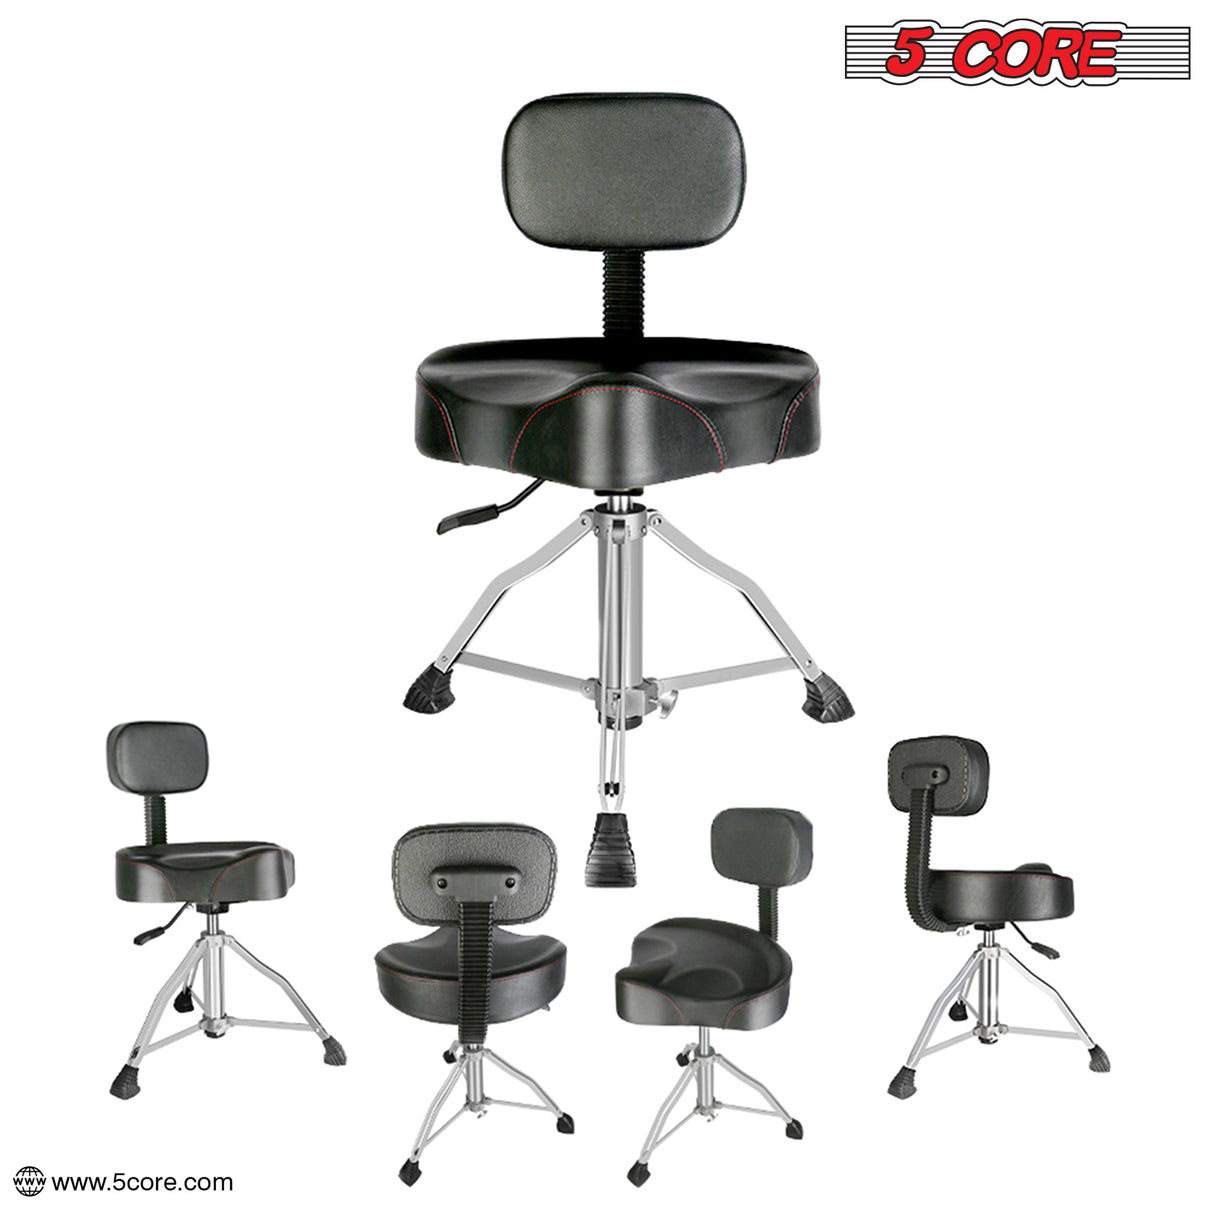 5 Core Drum Throne Padded Guitar Stool Height Adjustable Drummer Seat Music Chair for Adults And Kids